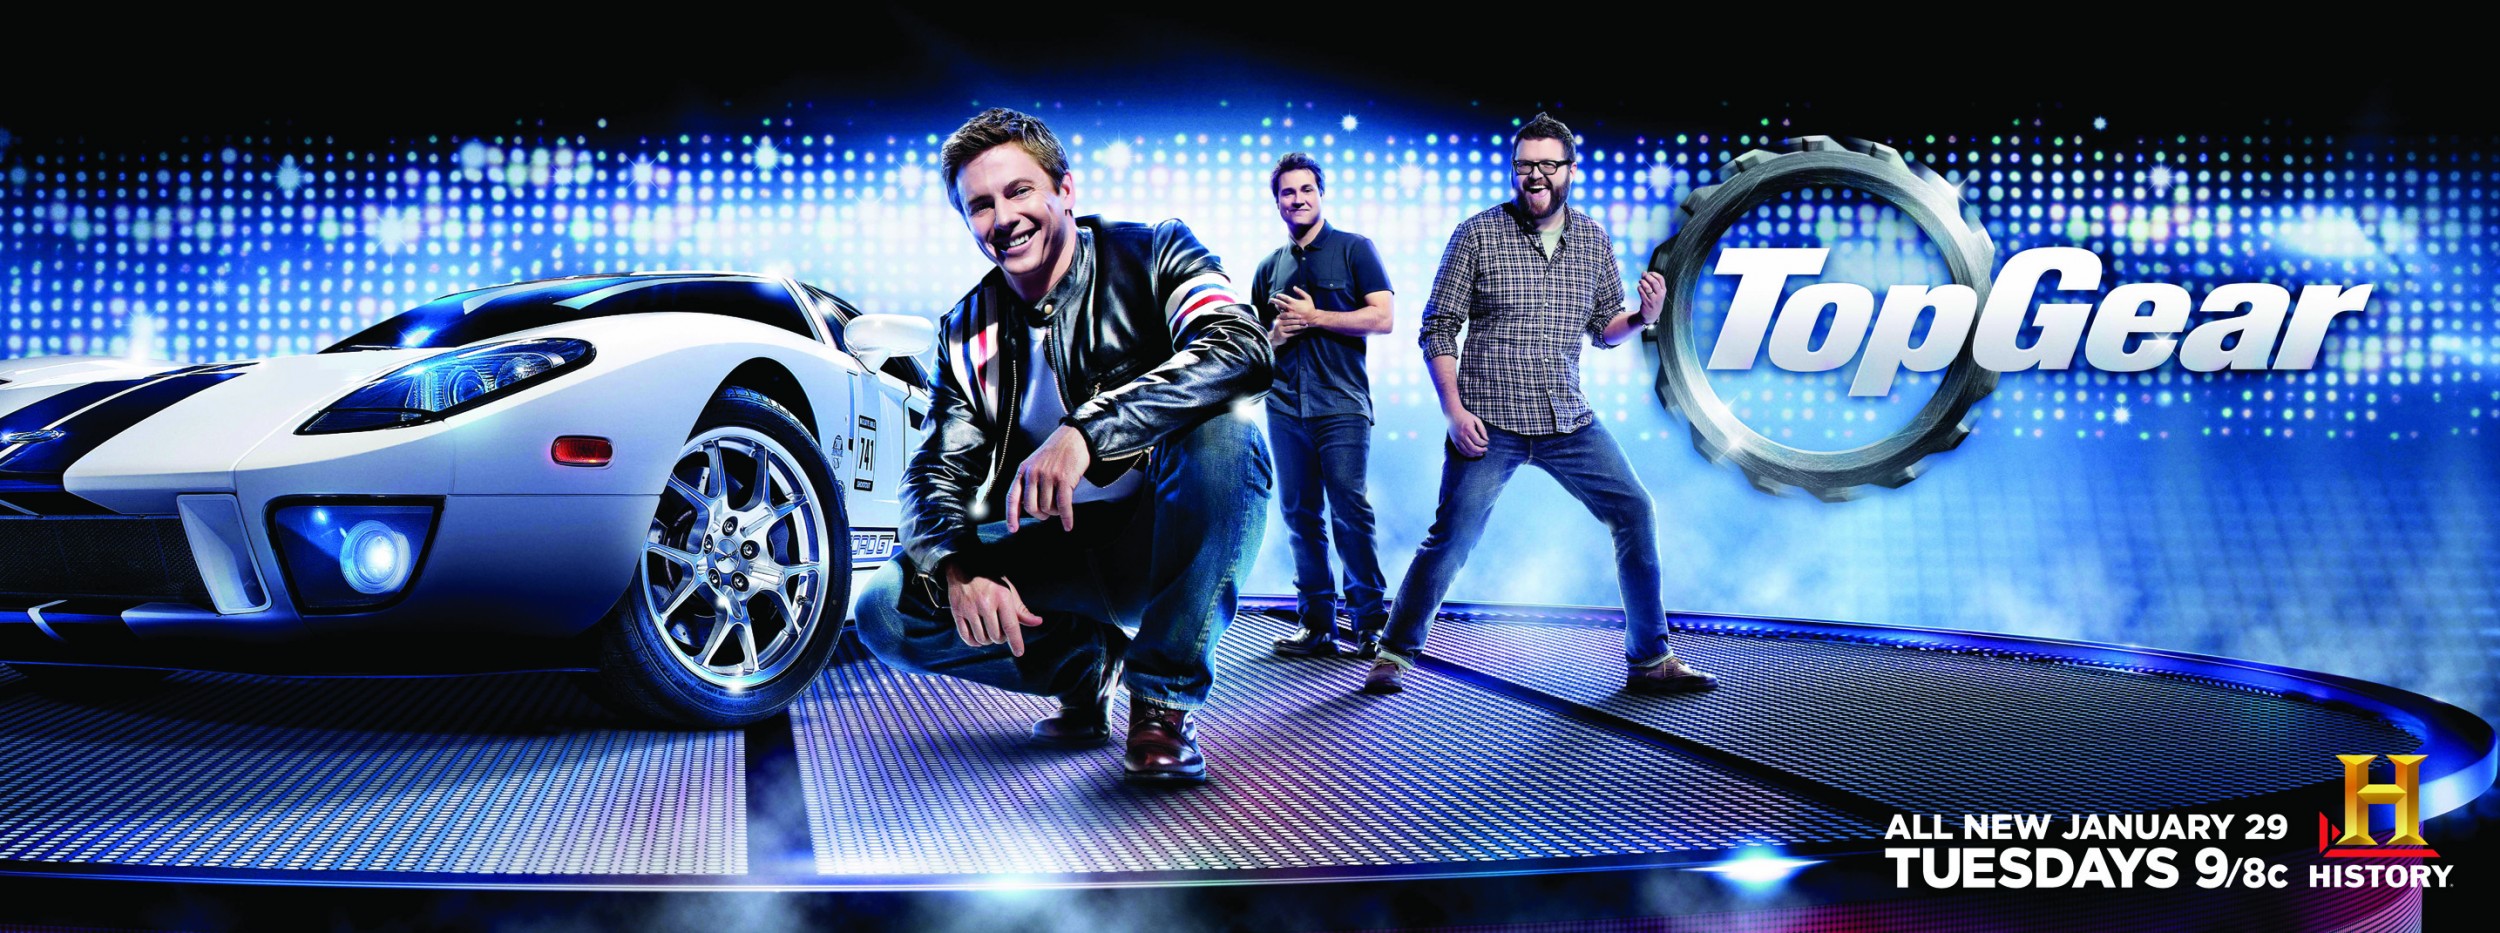 Mega Sized TV Poster Image for Top Gear (#4 of 4)